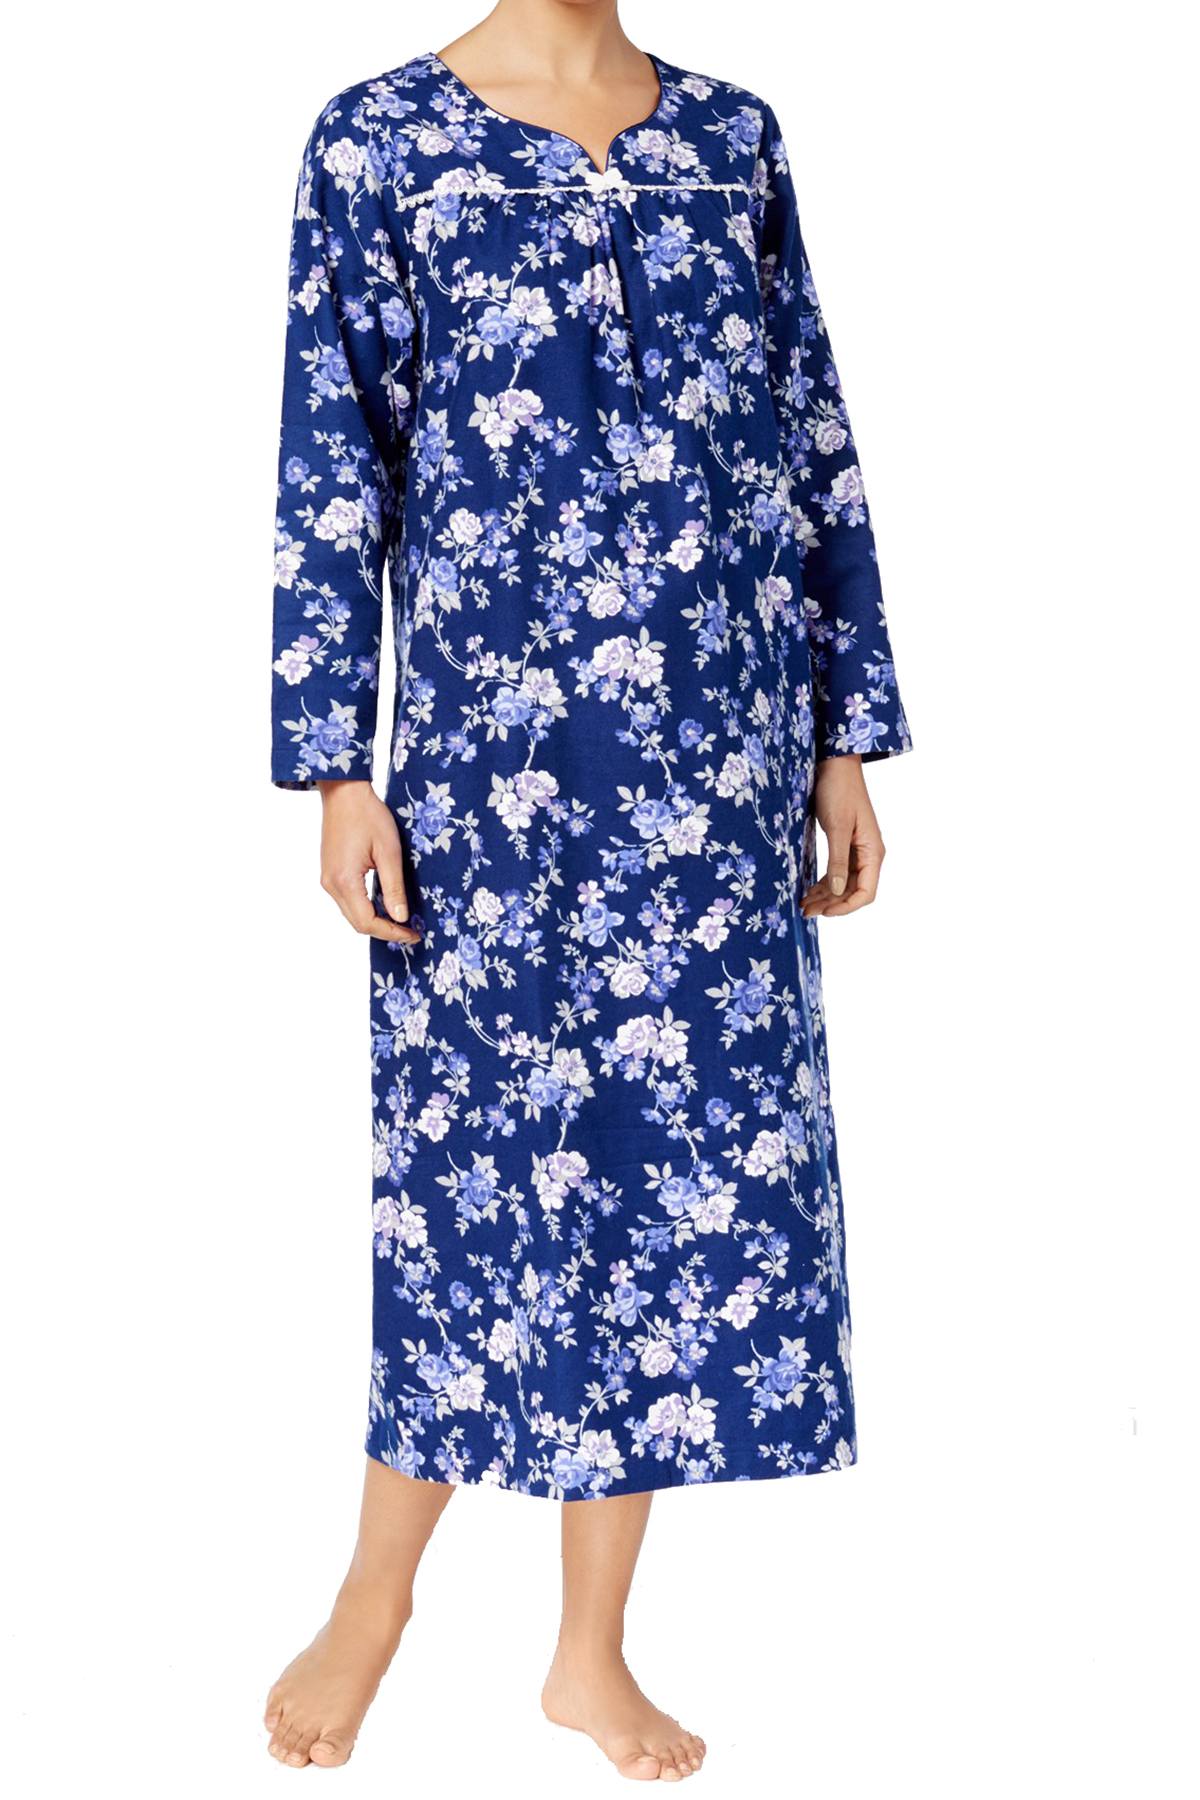 Charter Club Intimates Blue Rose-Garden Floral Flannel Lace-Trim Nightgown